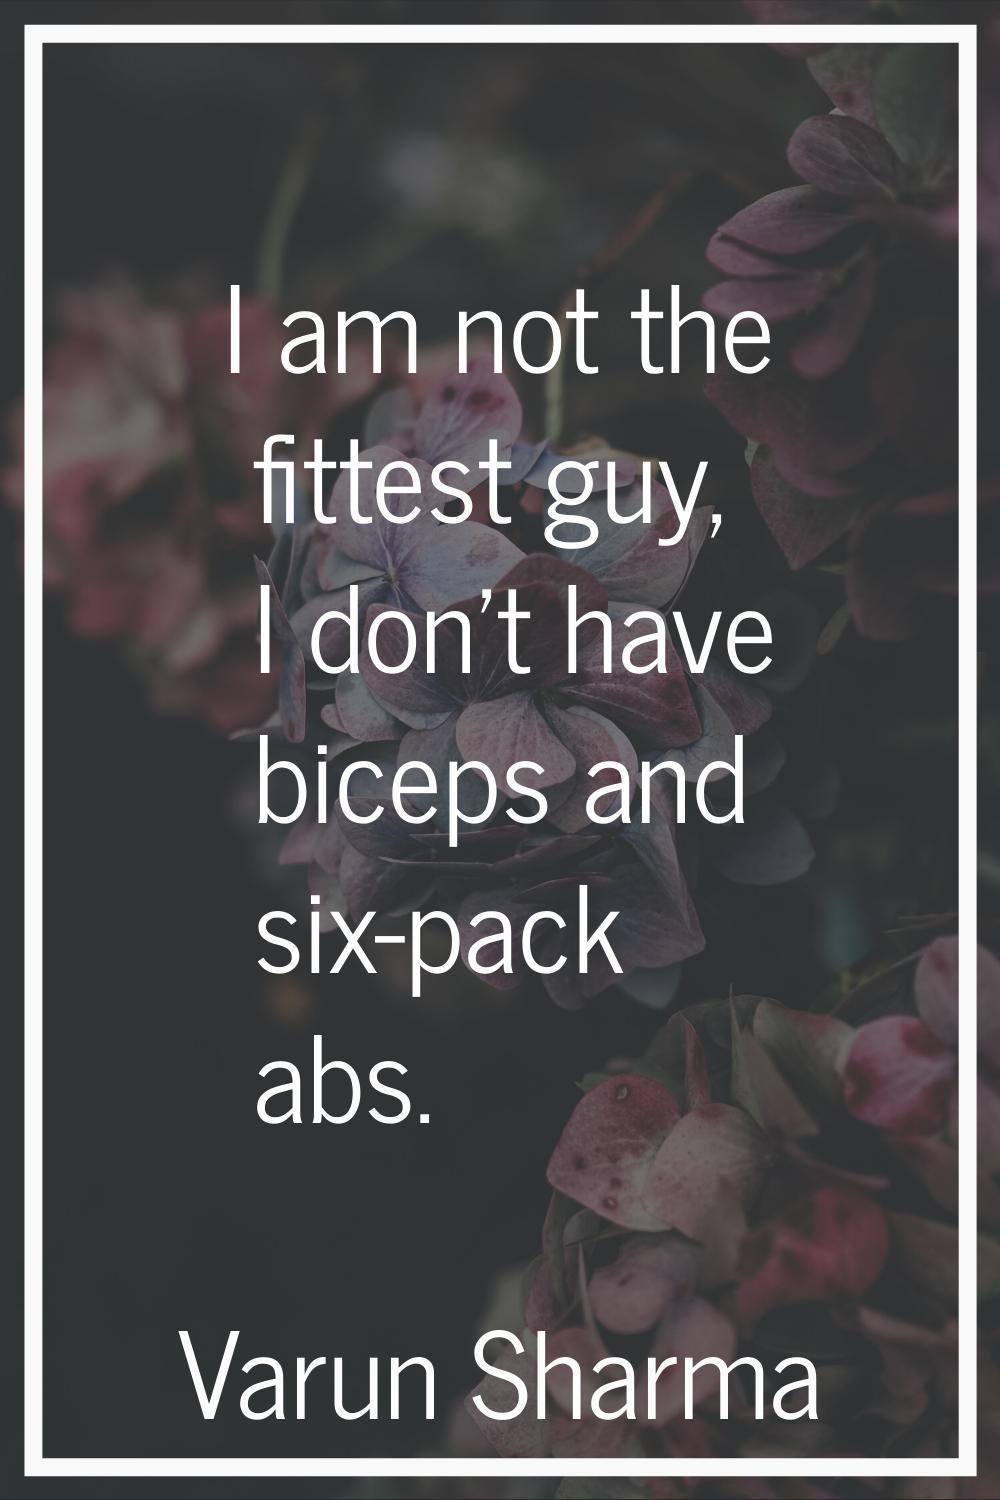 I am not the fittest guy, I don't have biceps and six-pack abs.